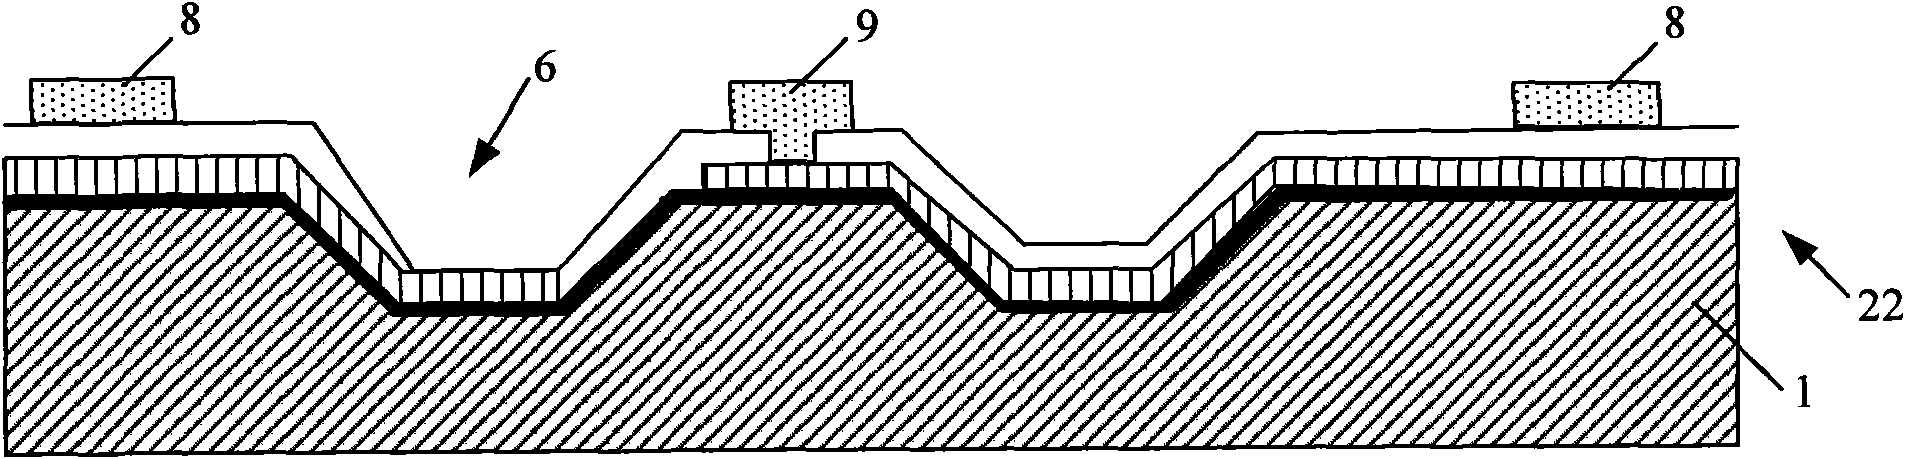 Manufacturing method of biaxial MEMS (micro-electro-mechanical system) gyroscope